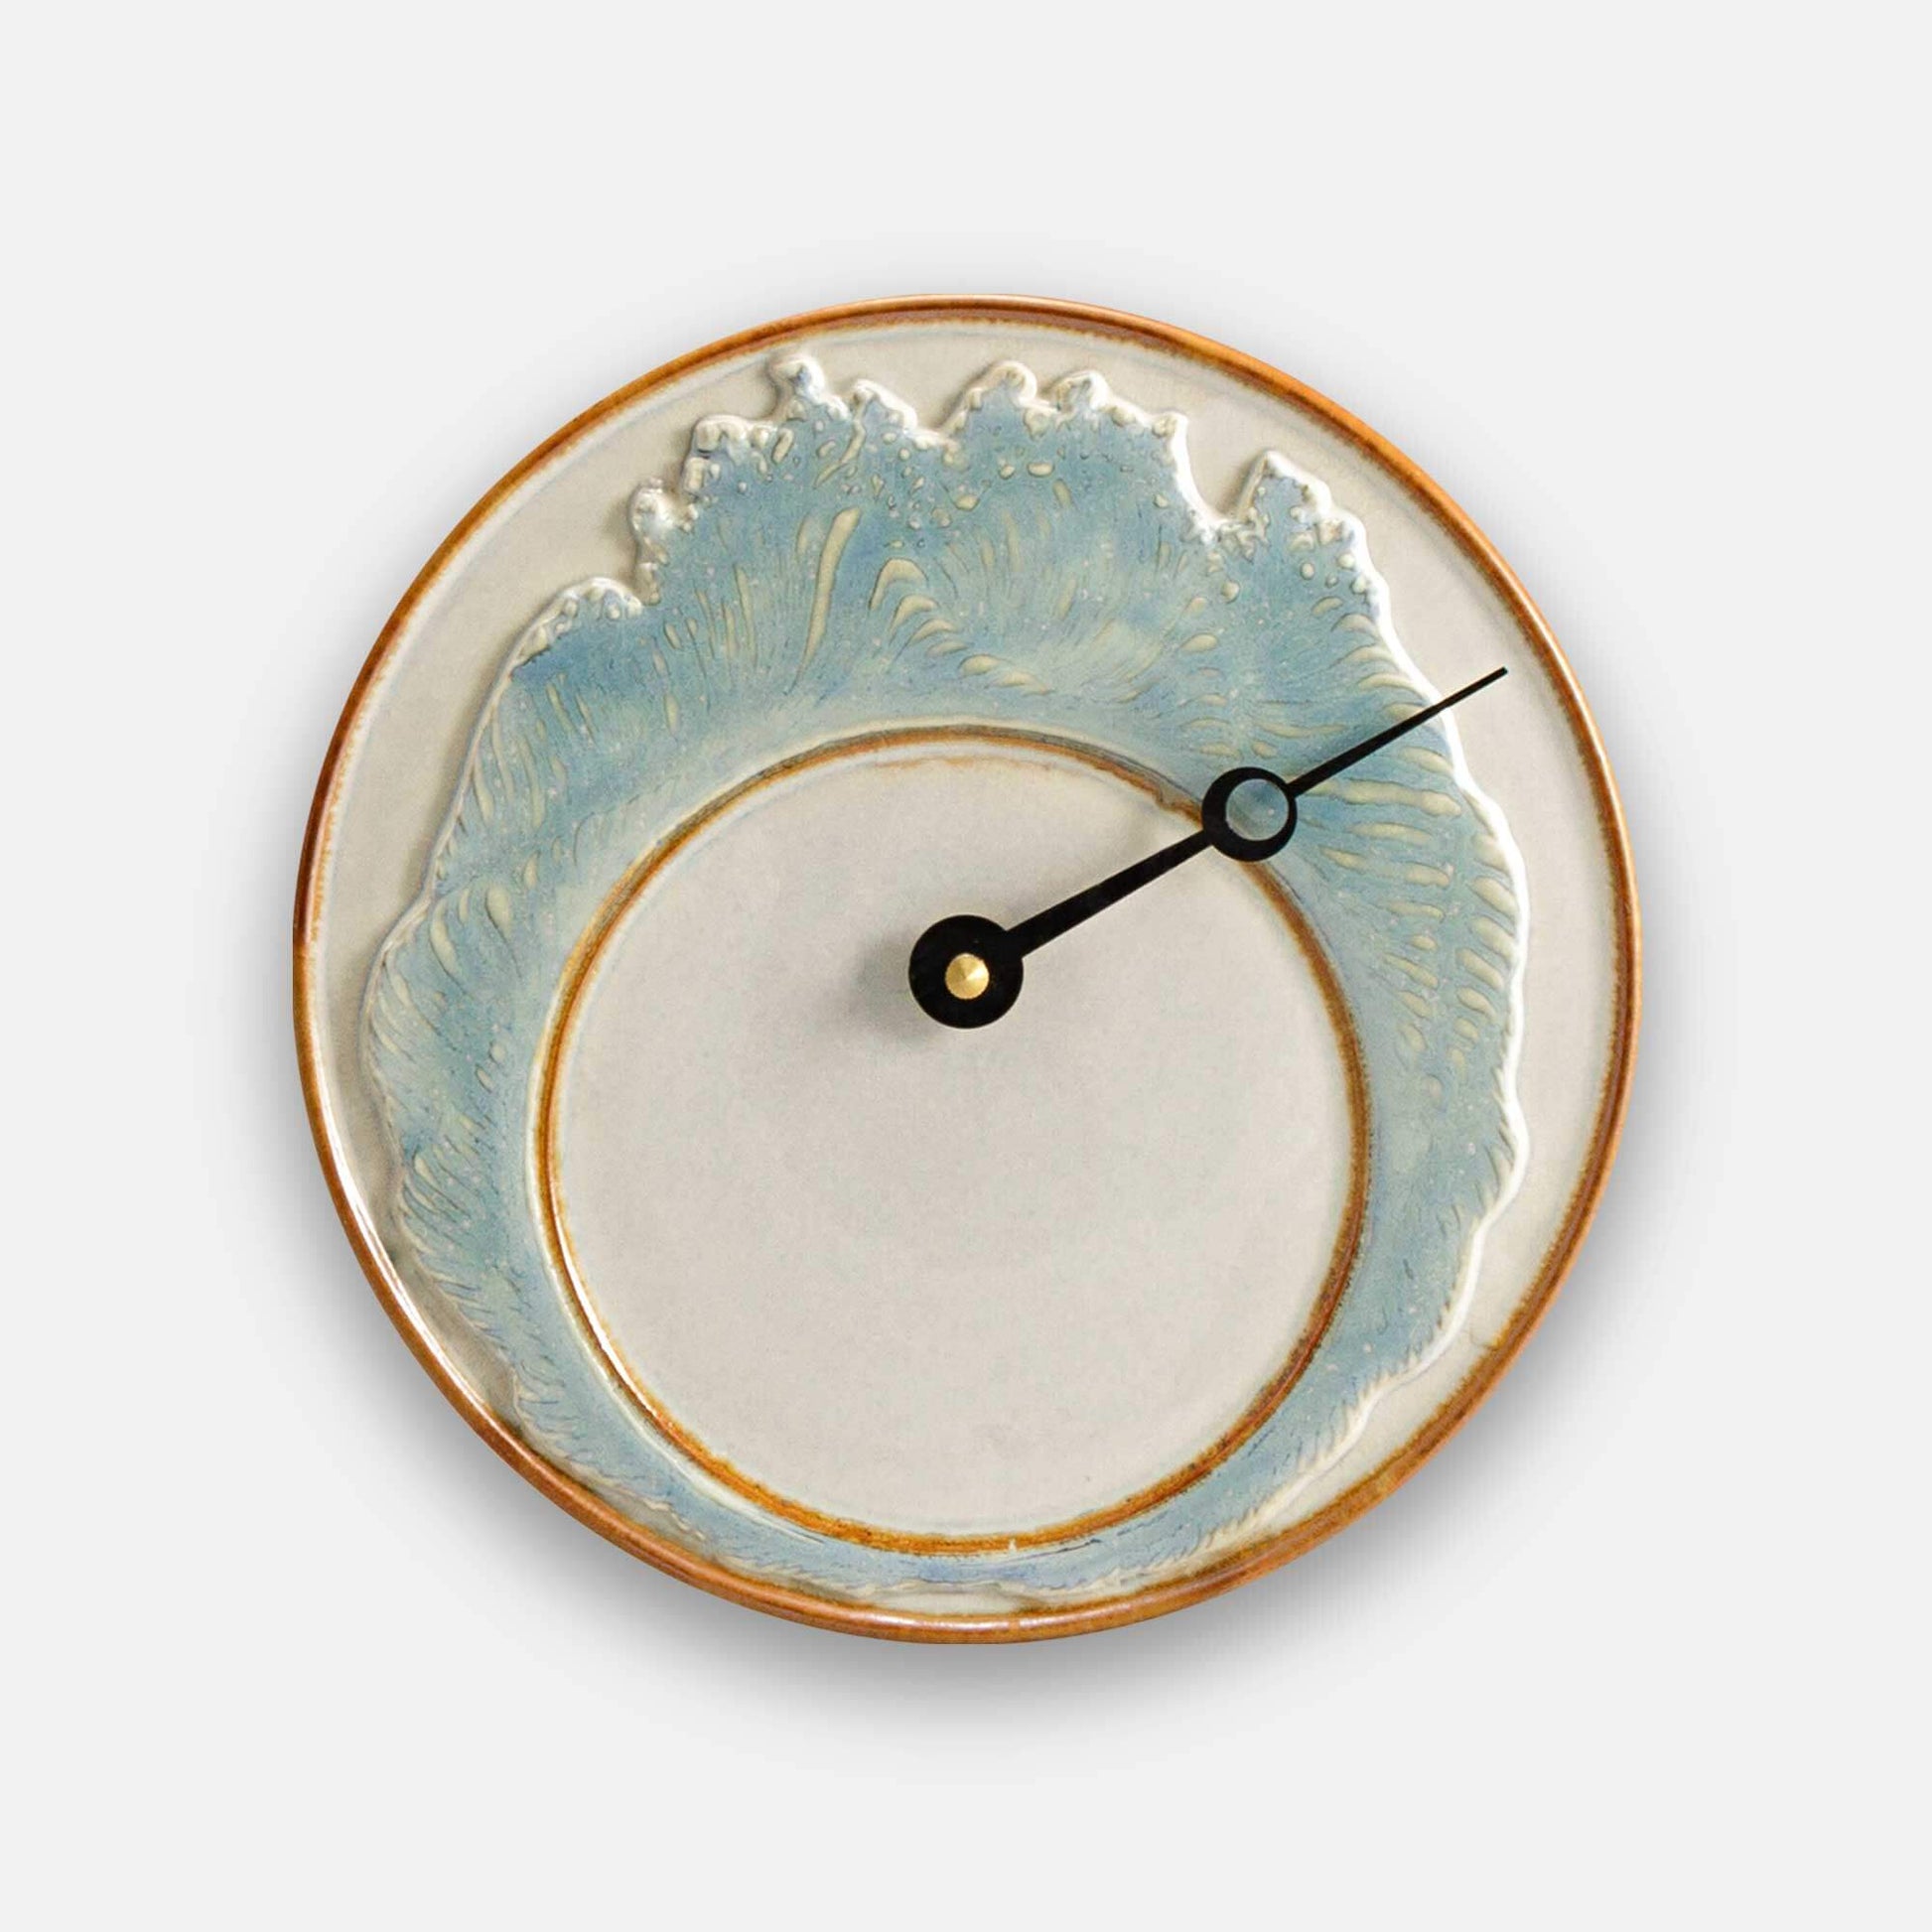 Handmade Pottery Tide Clock in Ivory Wave pattern made by Georgetown Pottery in Maine